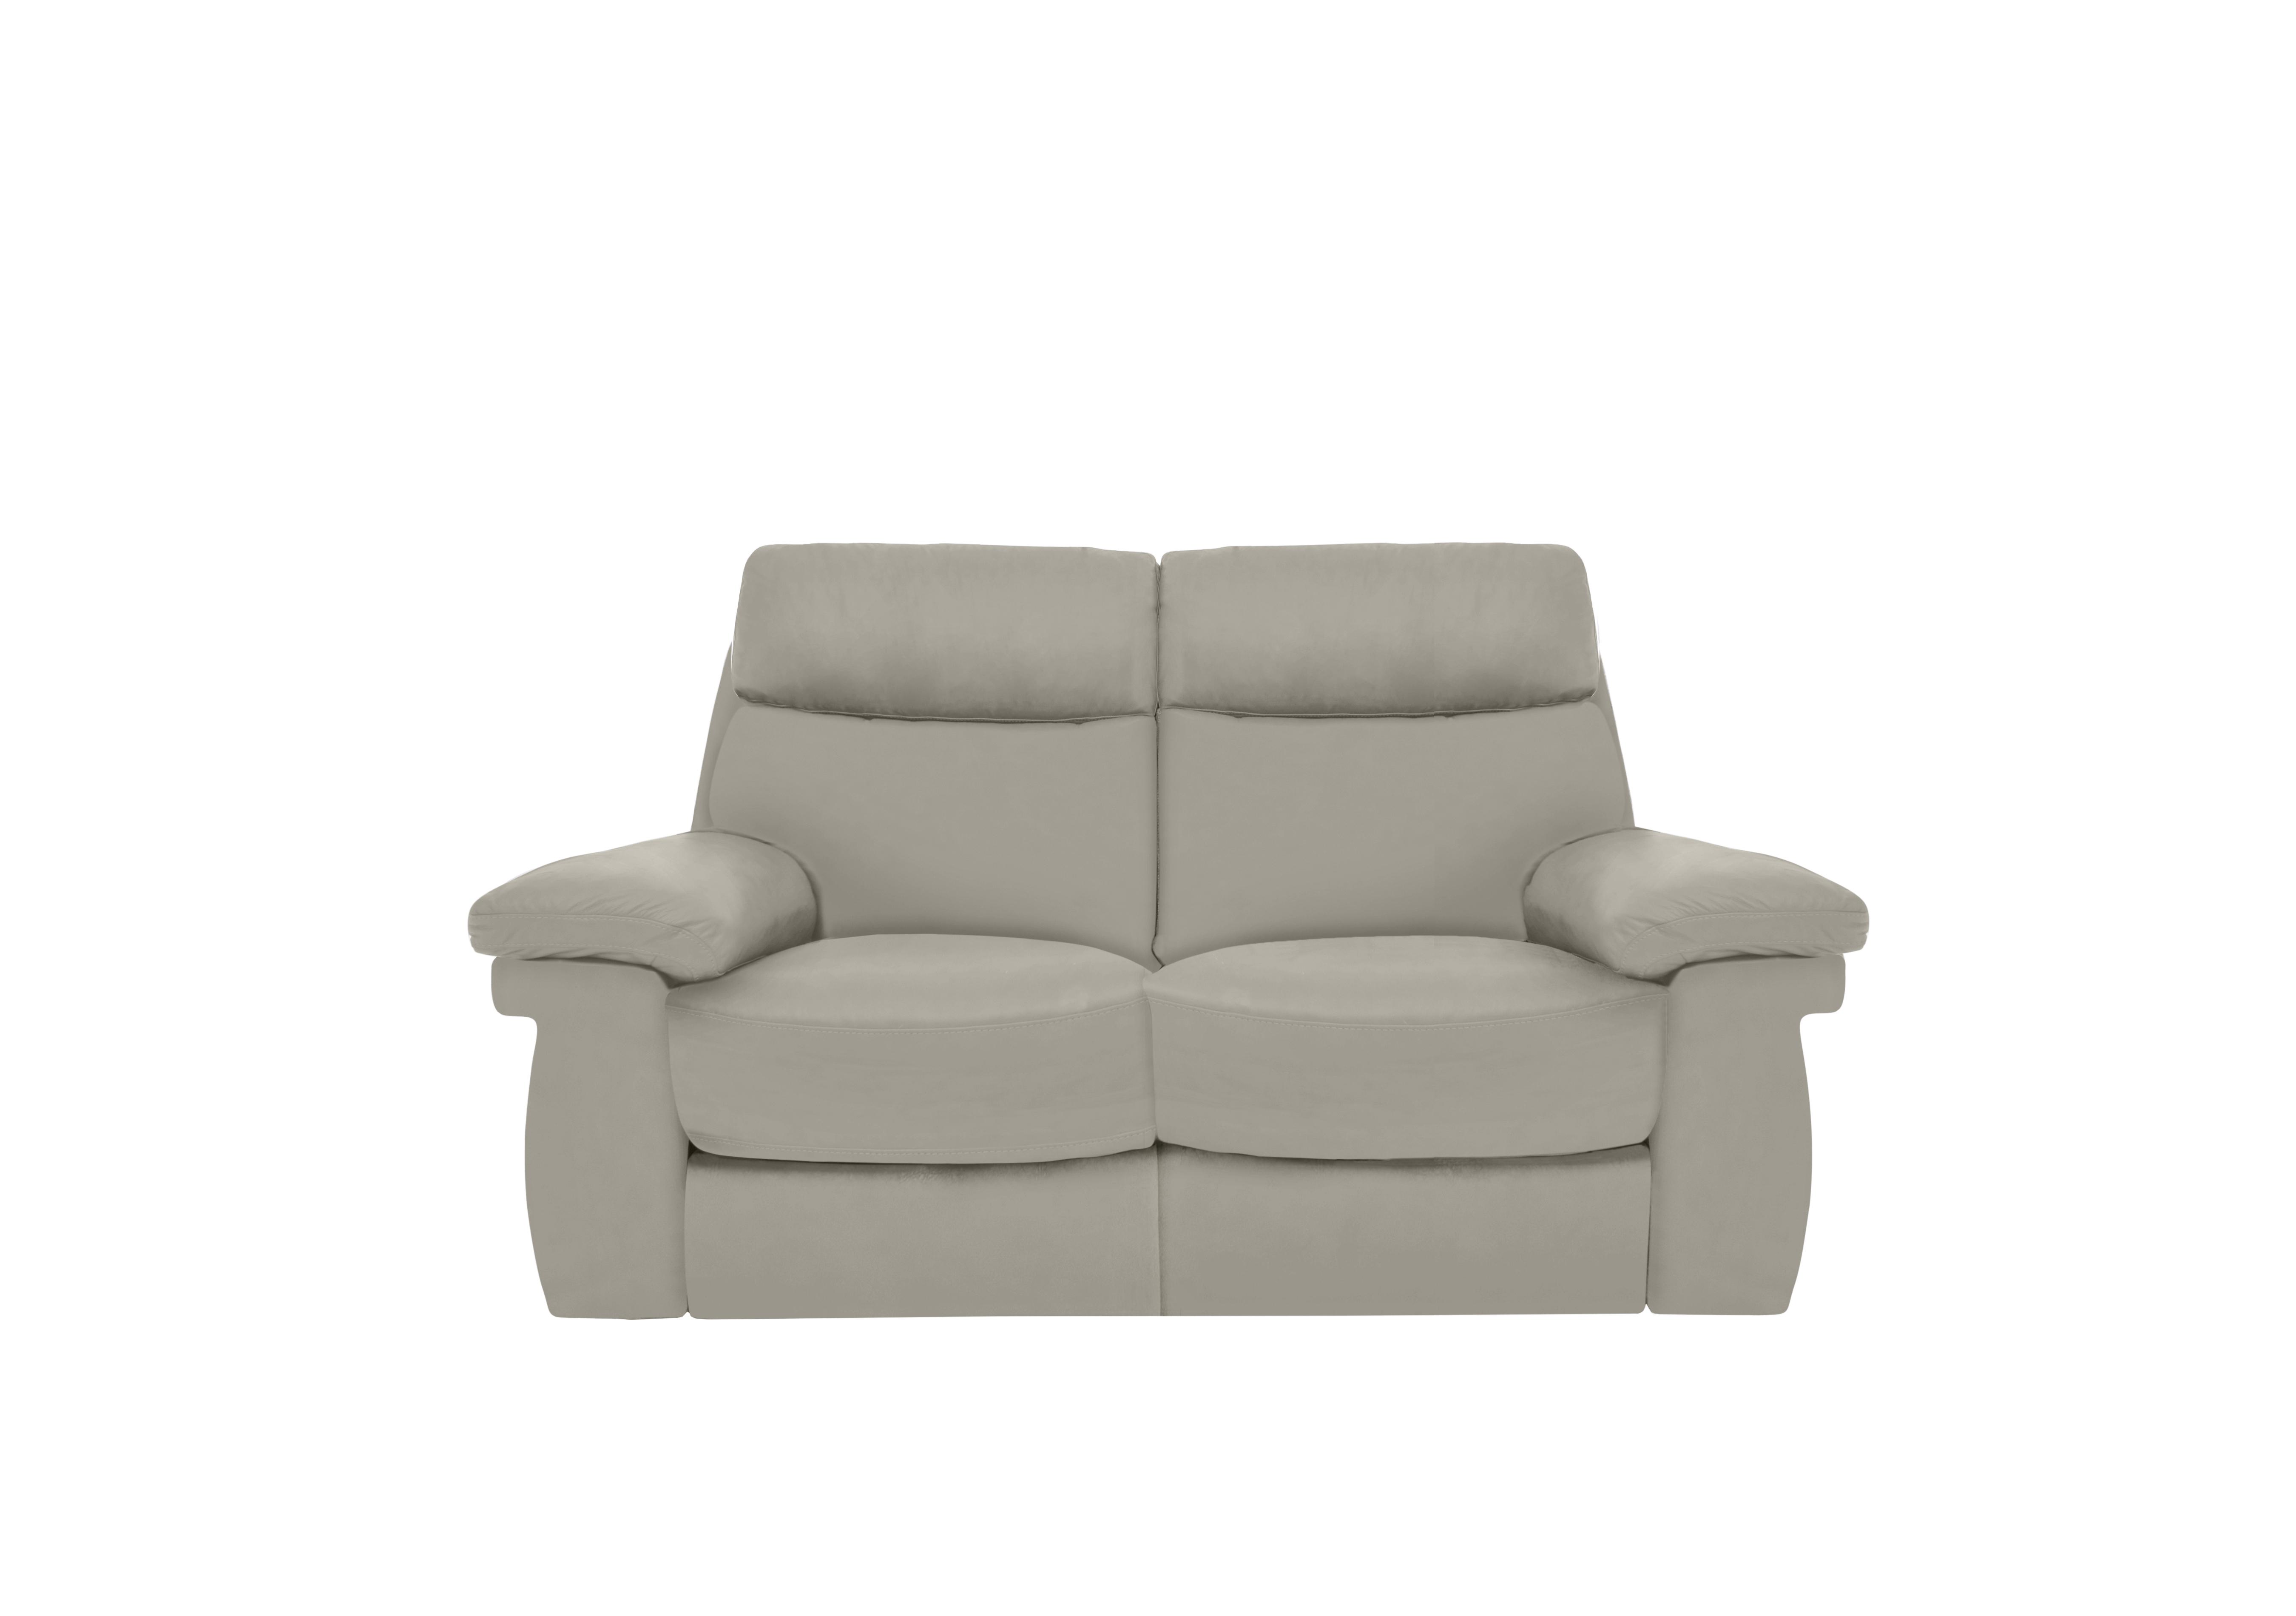 Serene 2 Seater Leather Sofa in Bx-251e Grey on Furniture Village